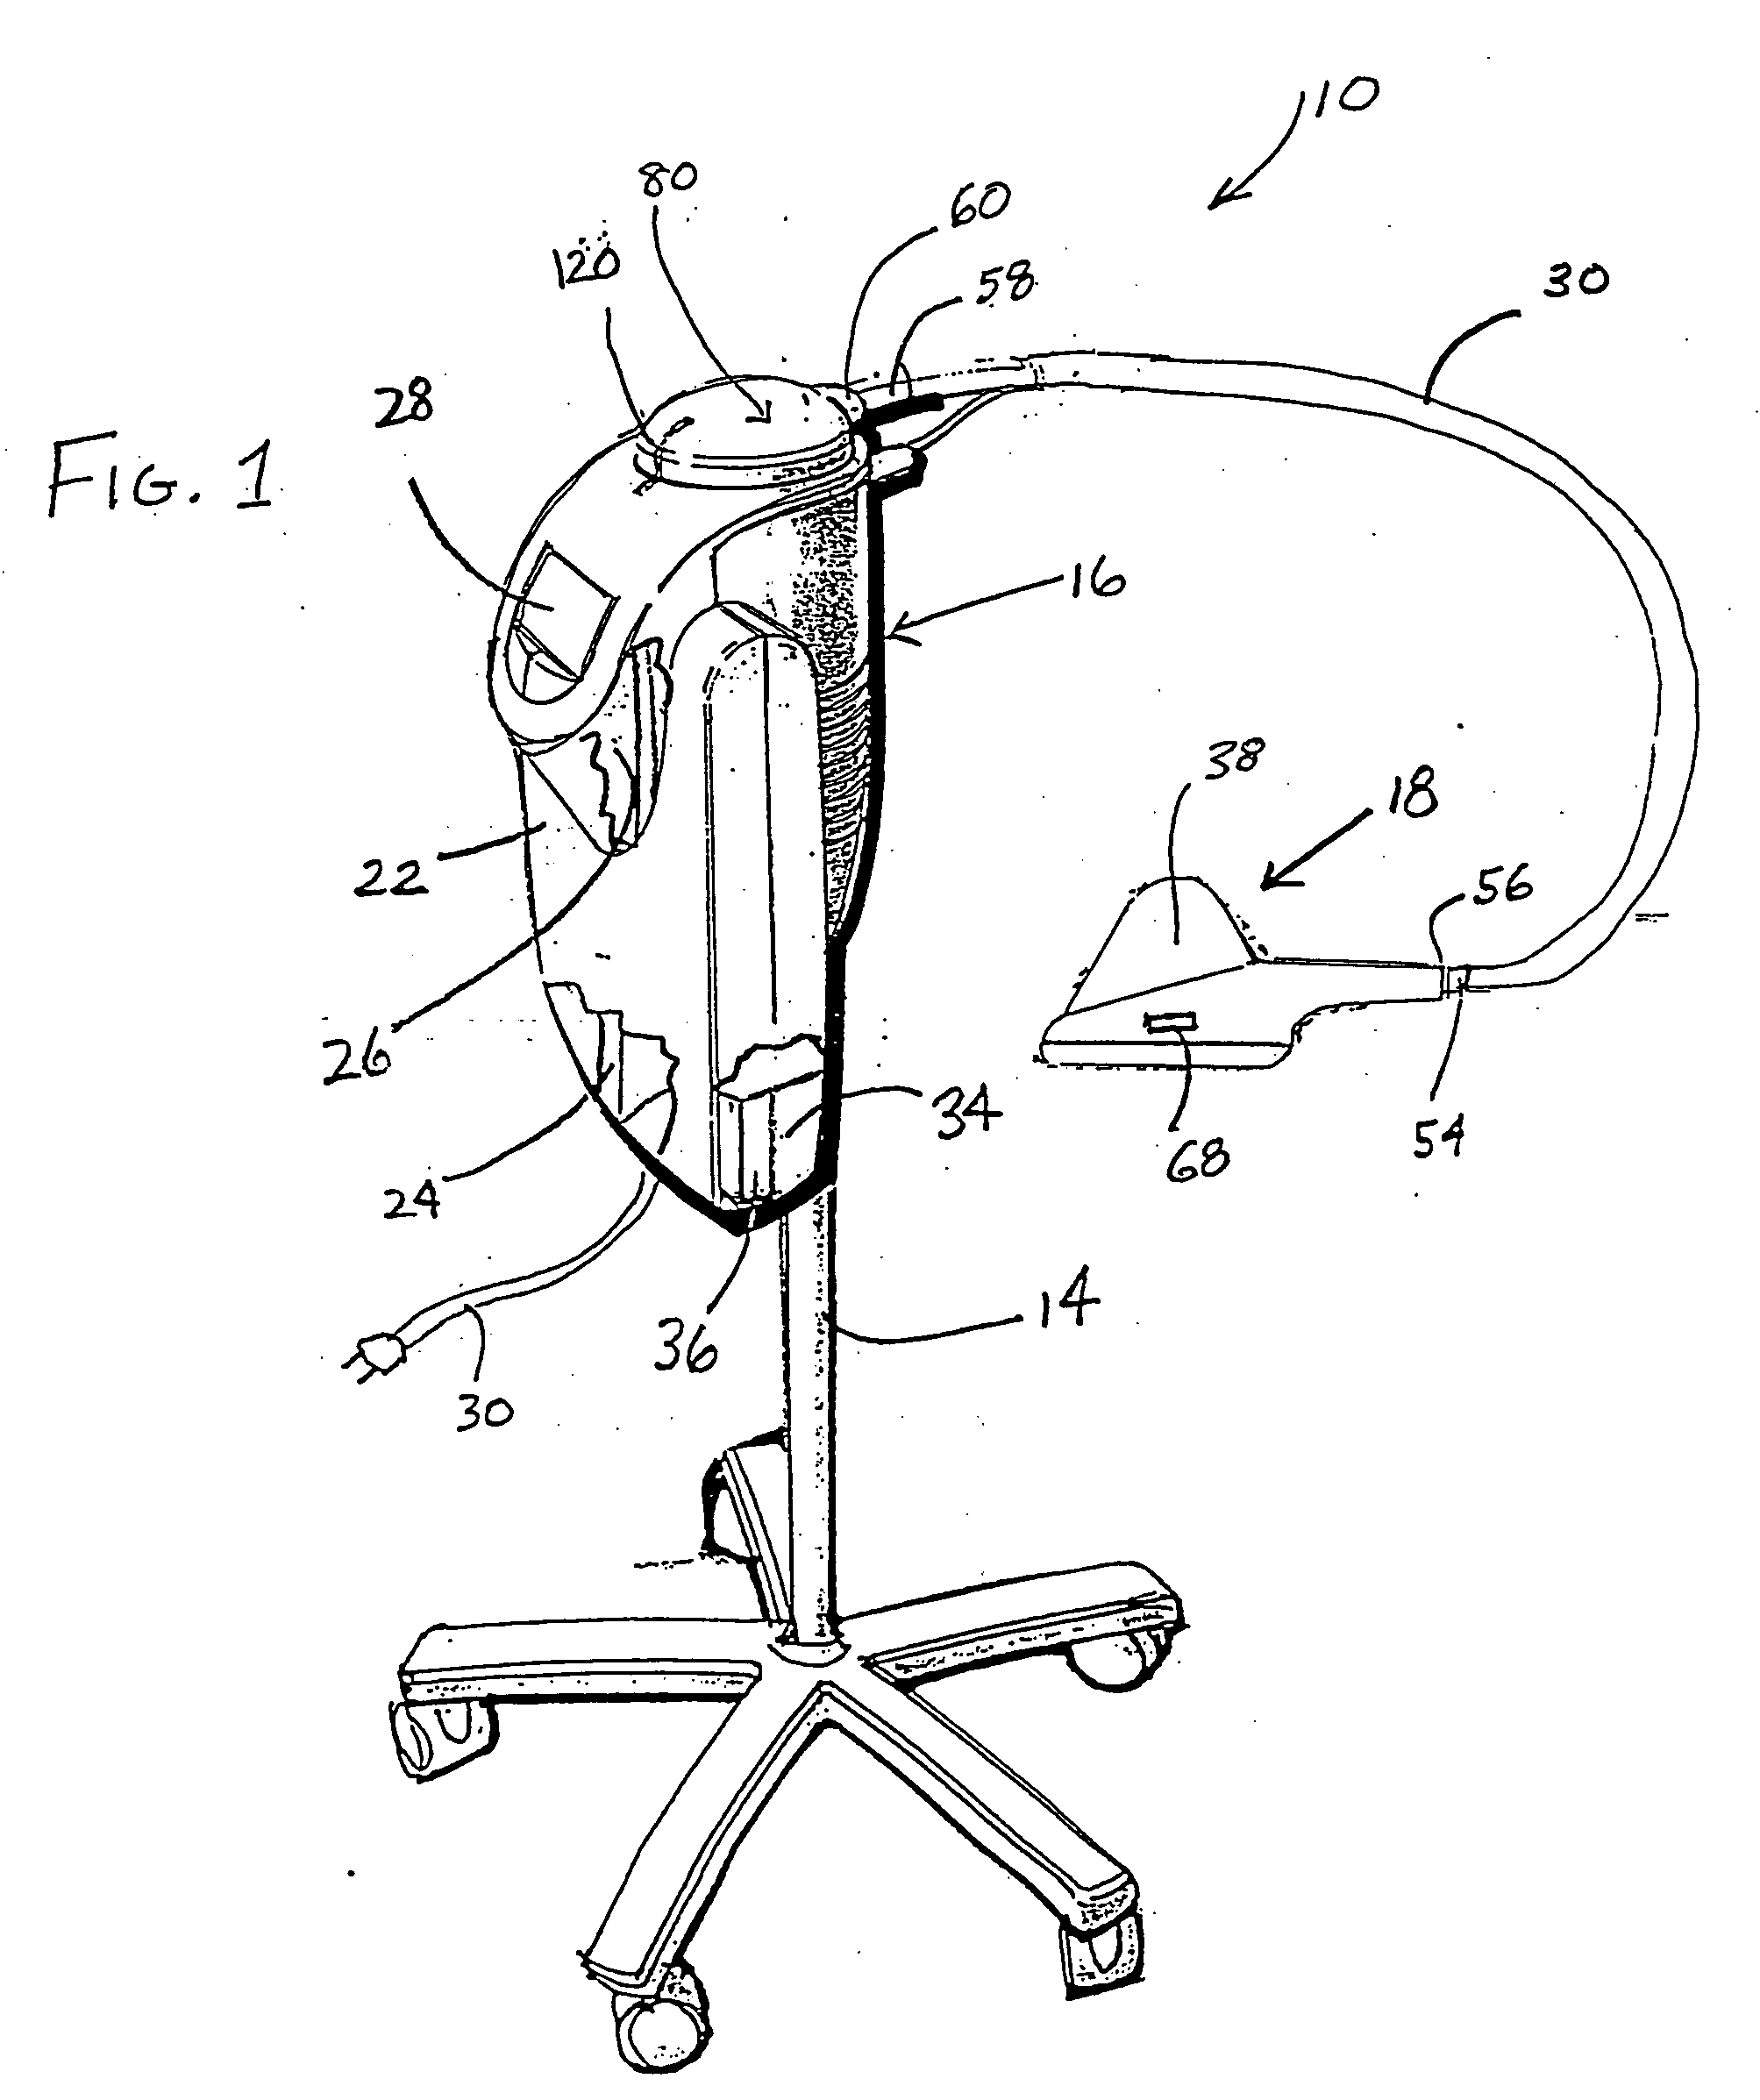 Systems and methods for applying ultrasound energy to stimulating circulatory activity in a targeted body region of an individual